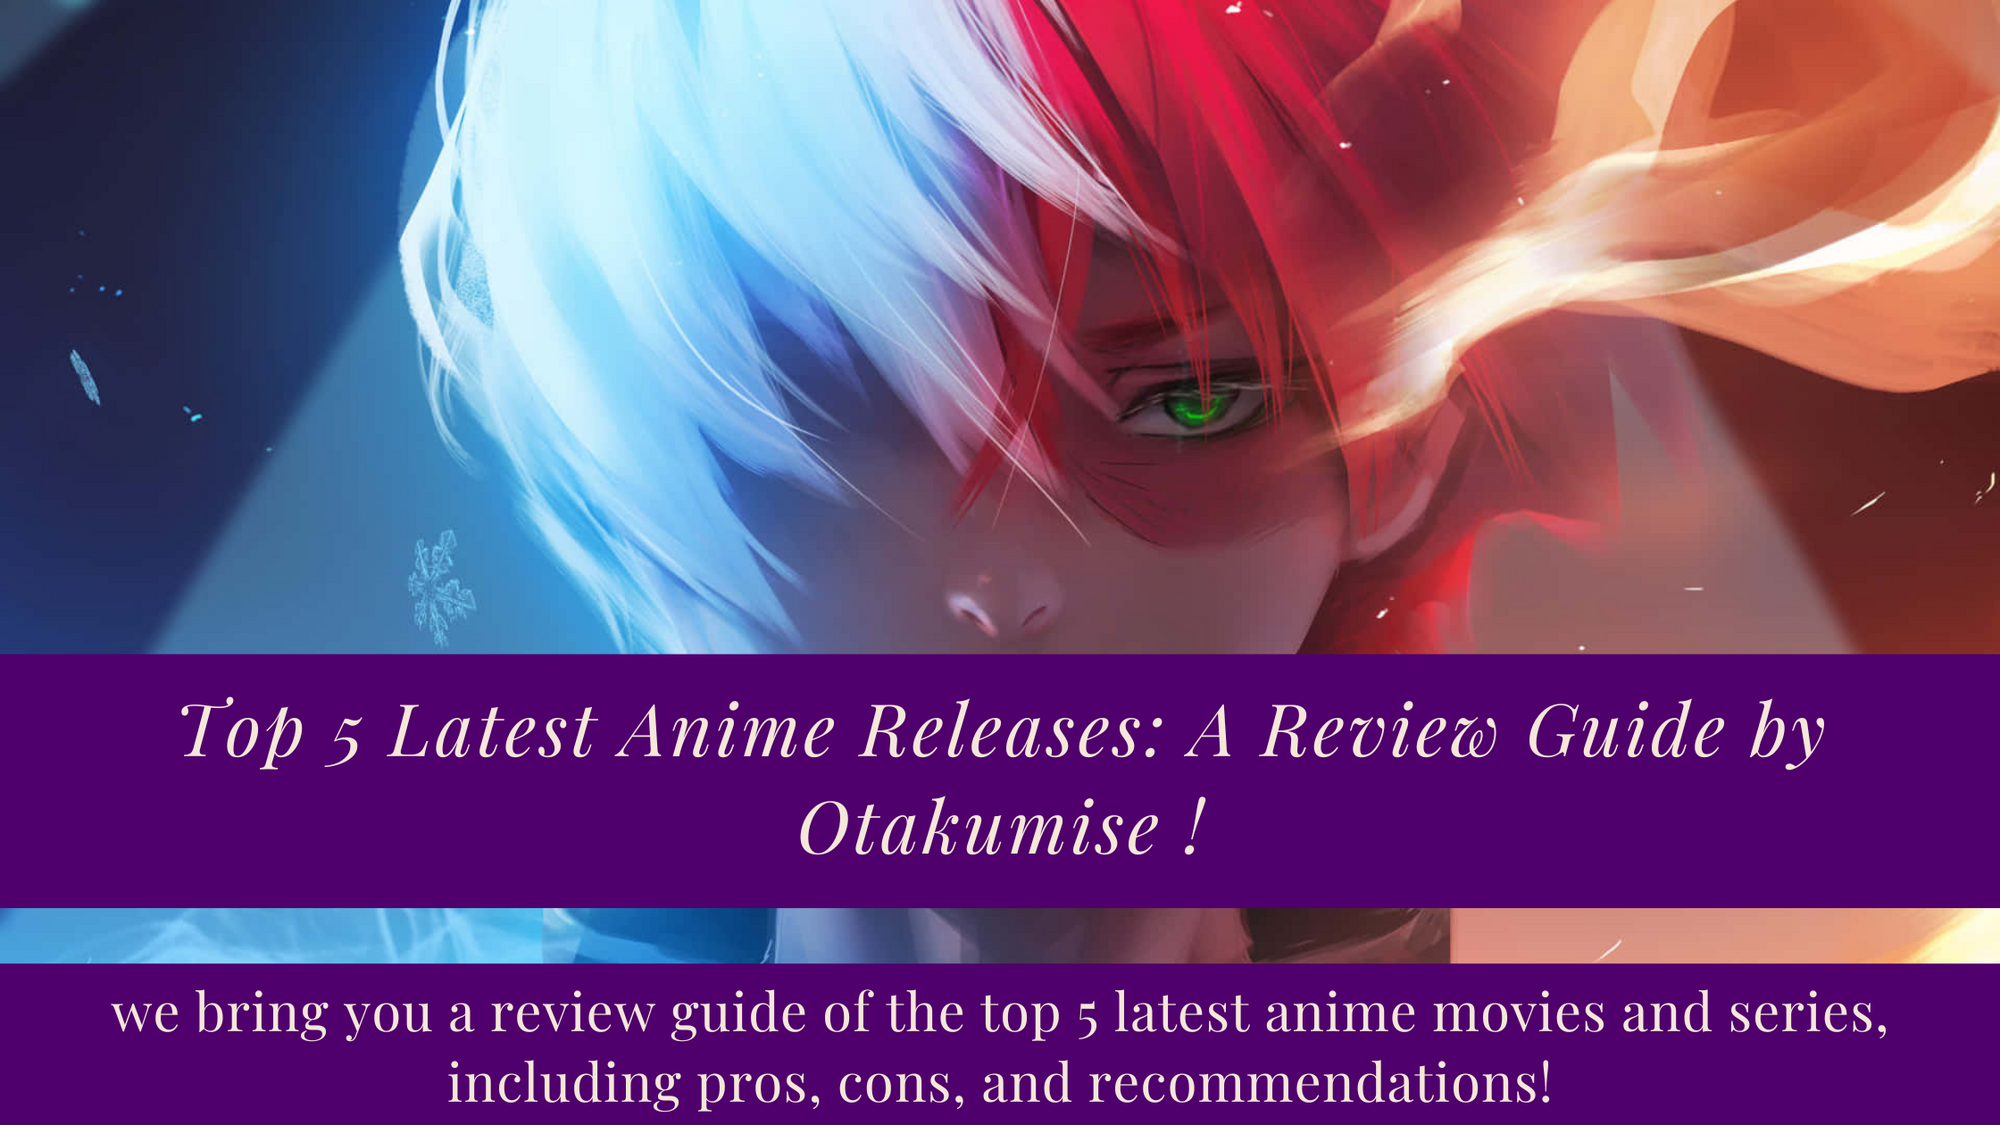 Top 5 Latest Anime Releases A Review Guide by Otakumise !